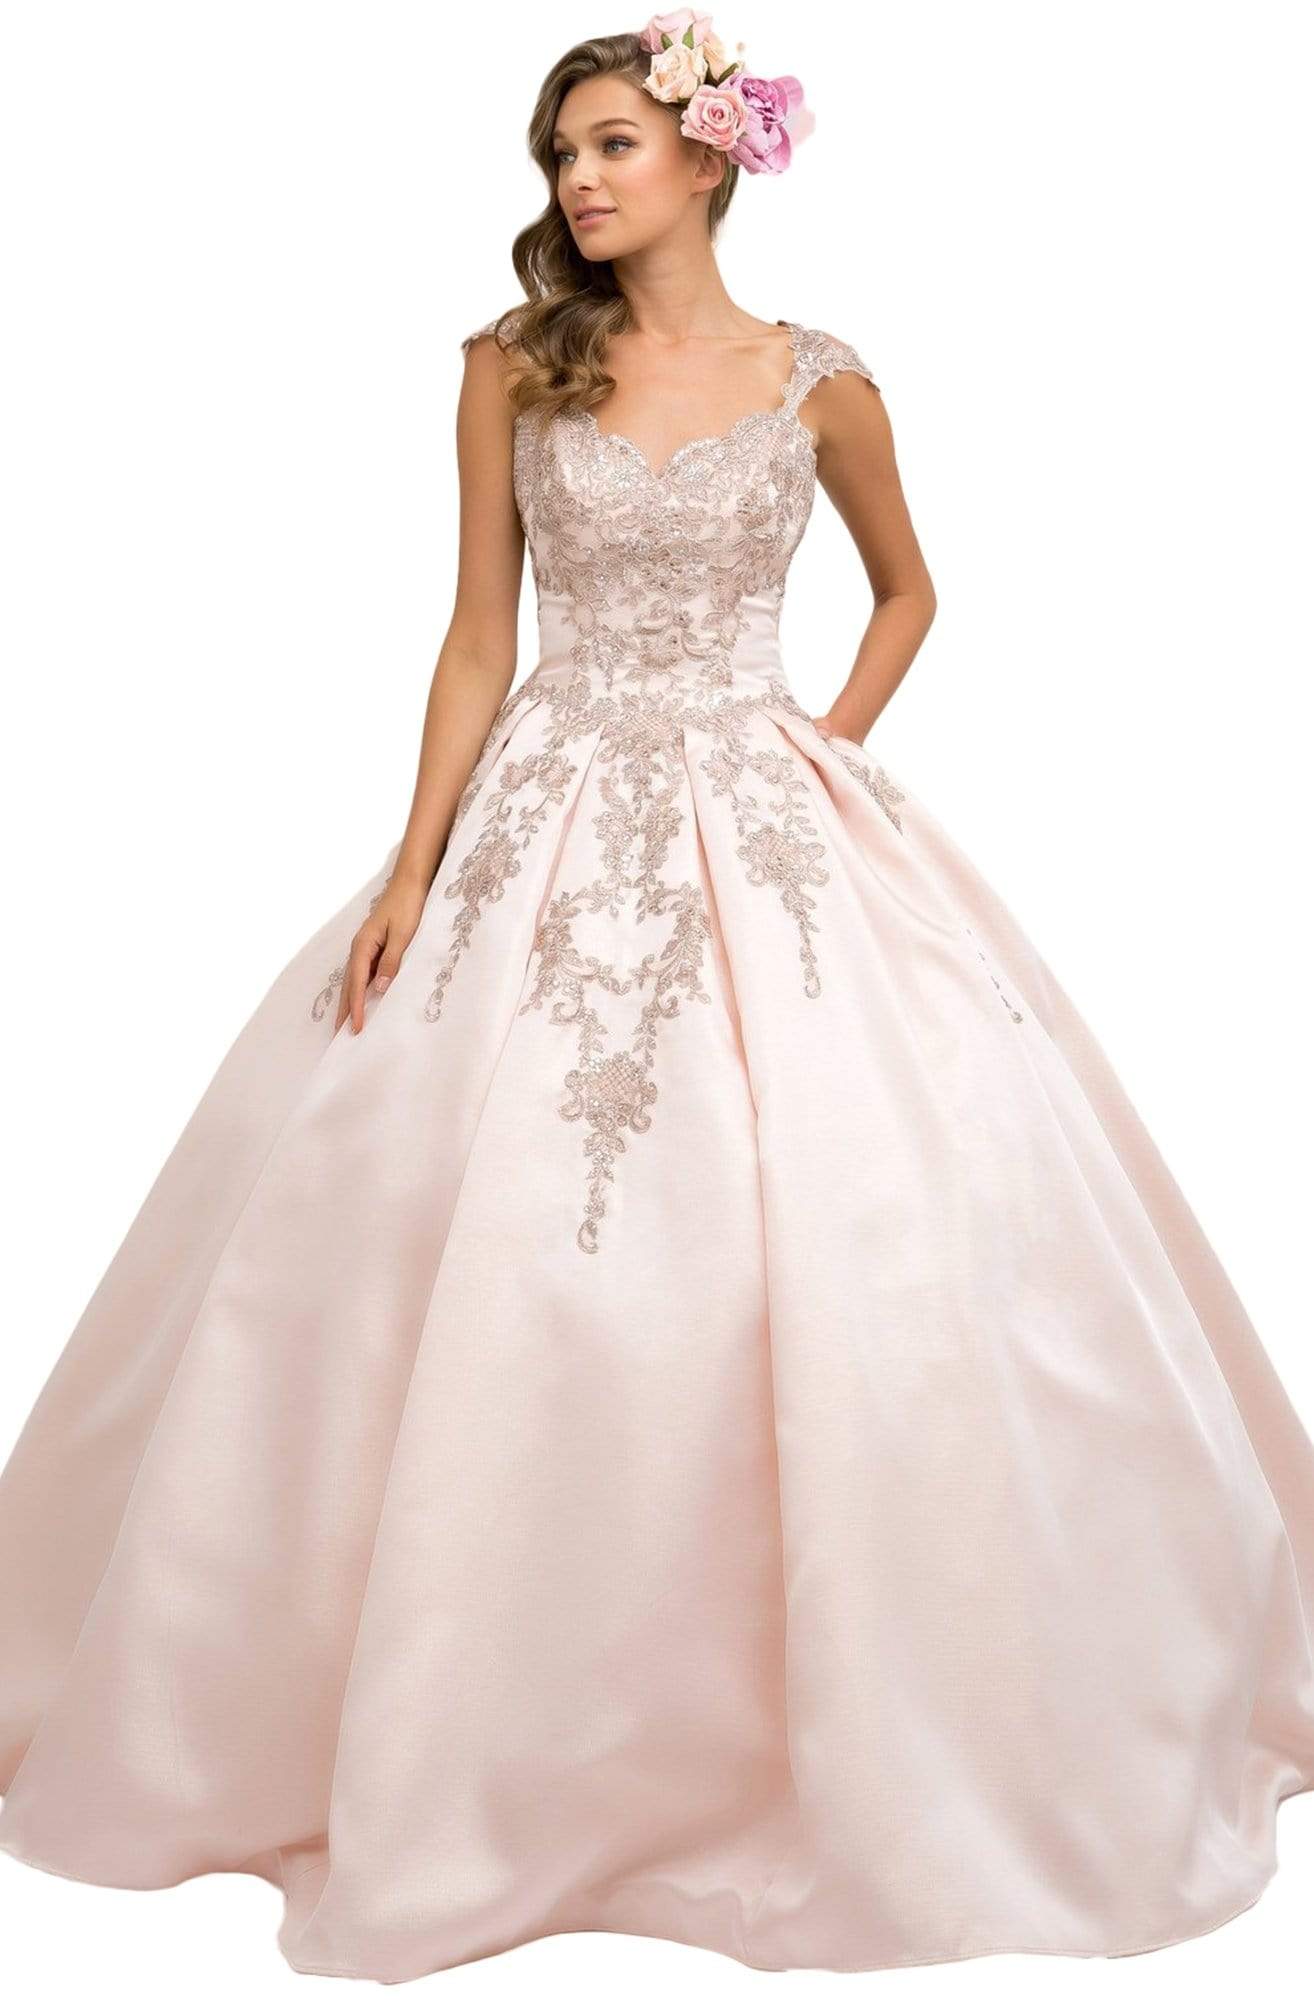 Image of Nox Anabel - U801 Cap Sleeve Lace Appliqued Cutout Ballgown